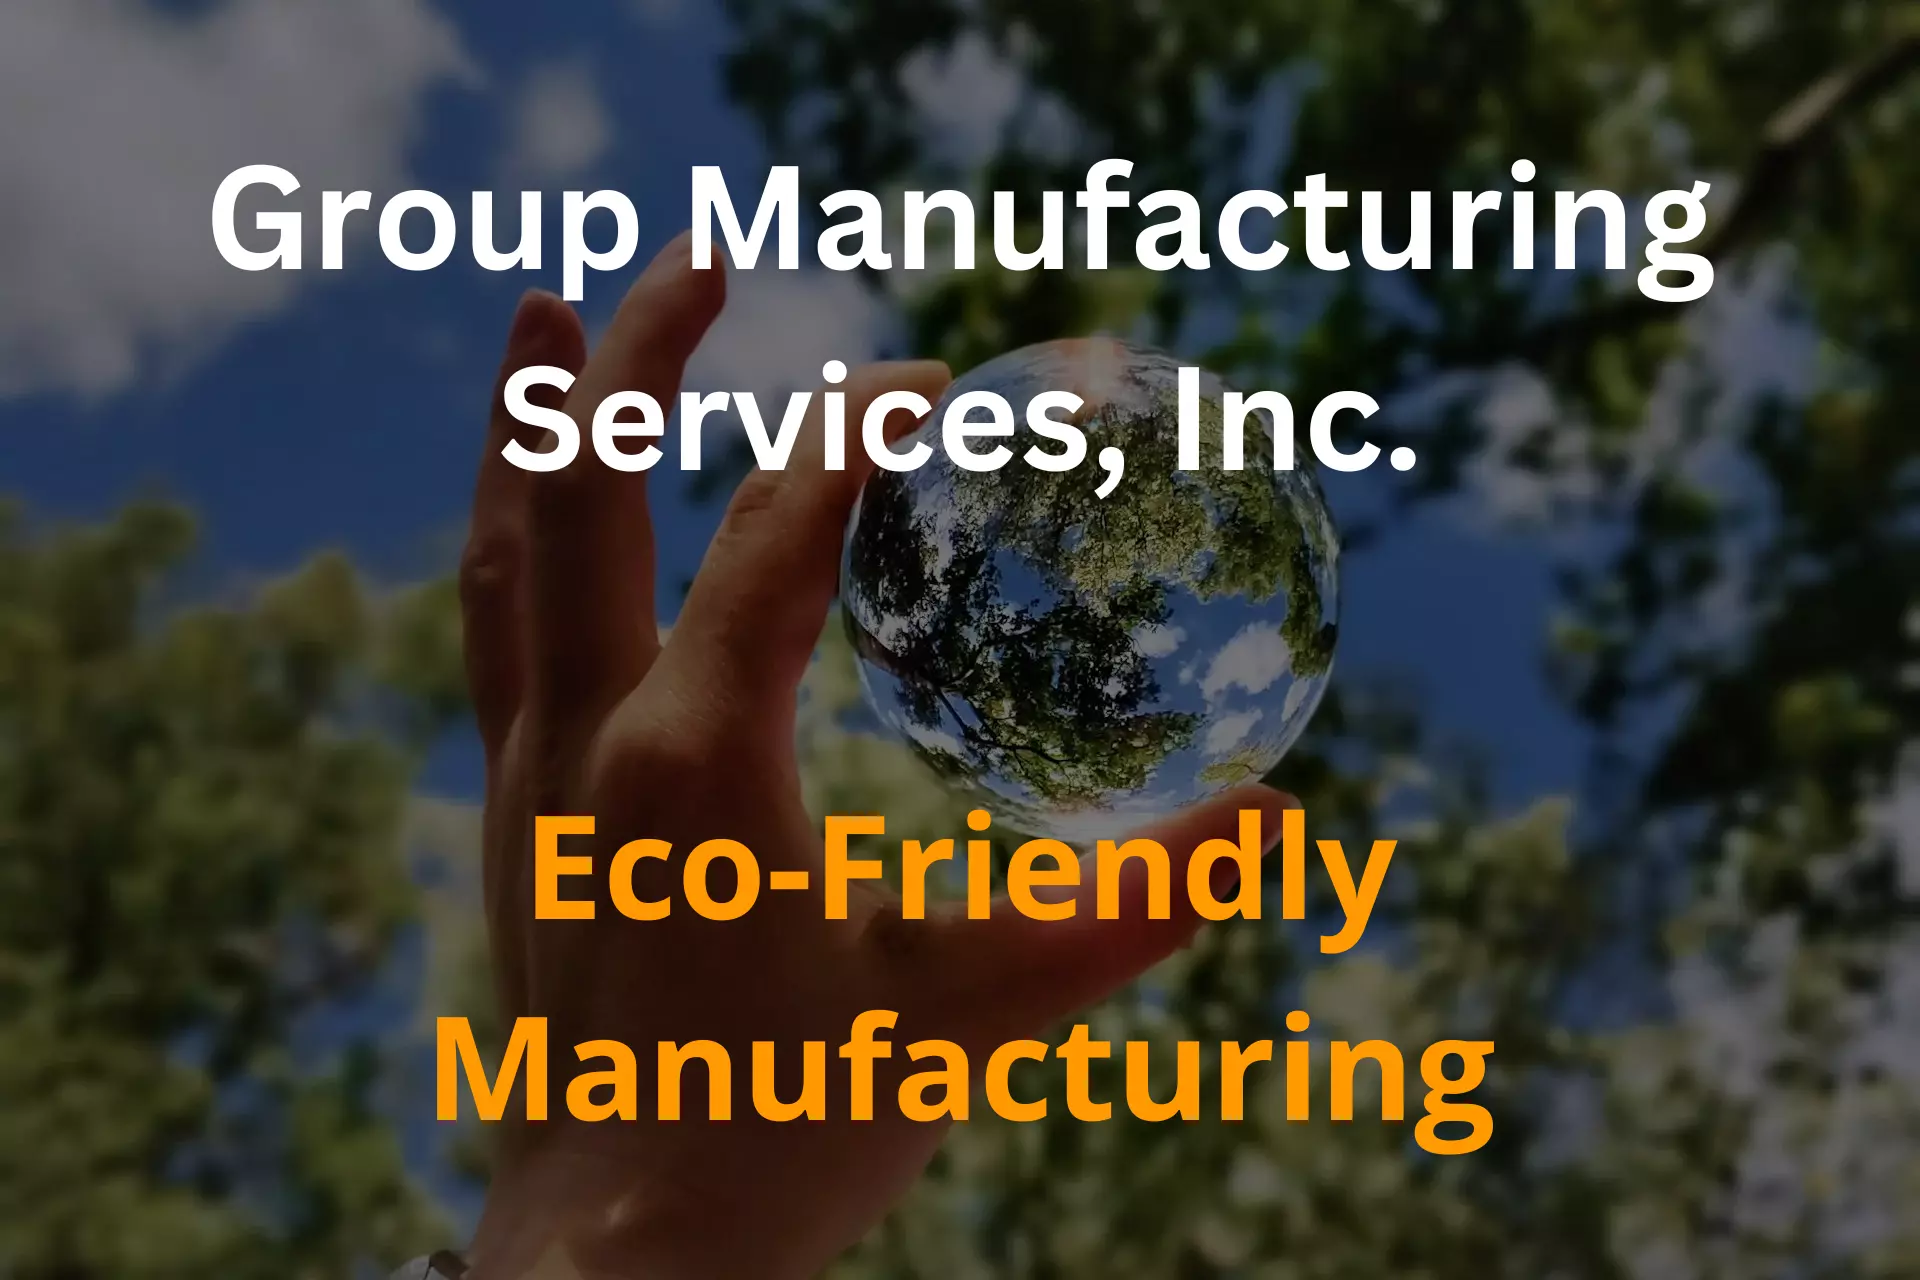 Eco-Friendly Manufacturing